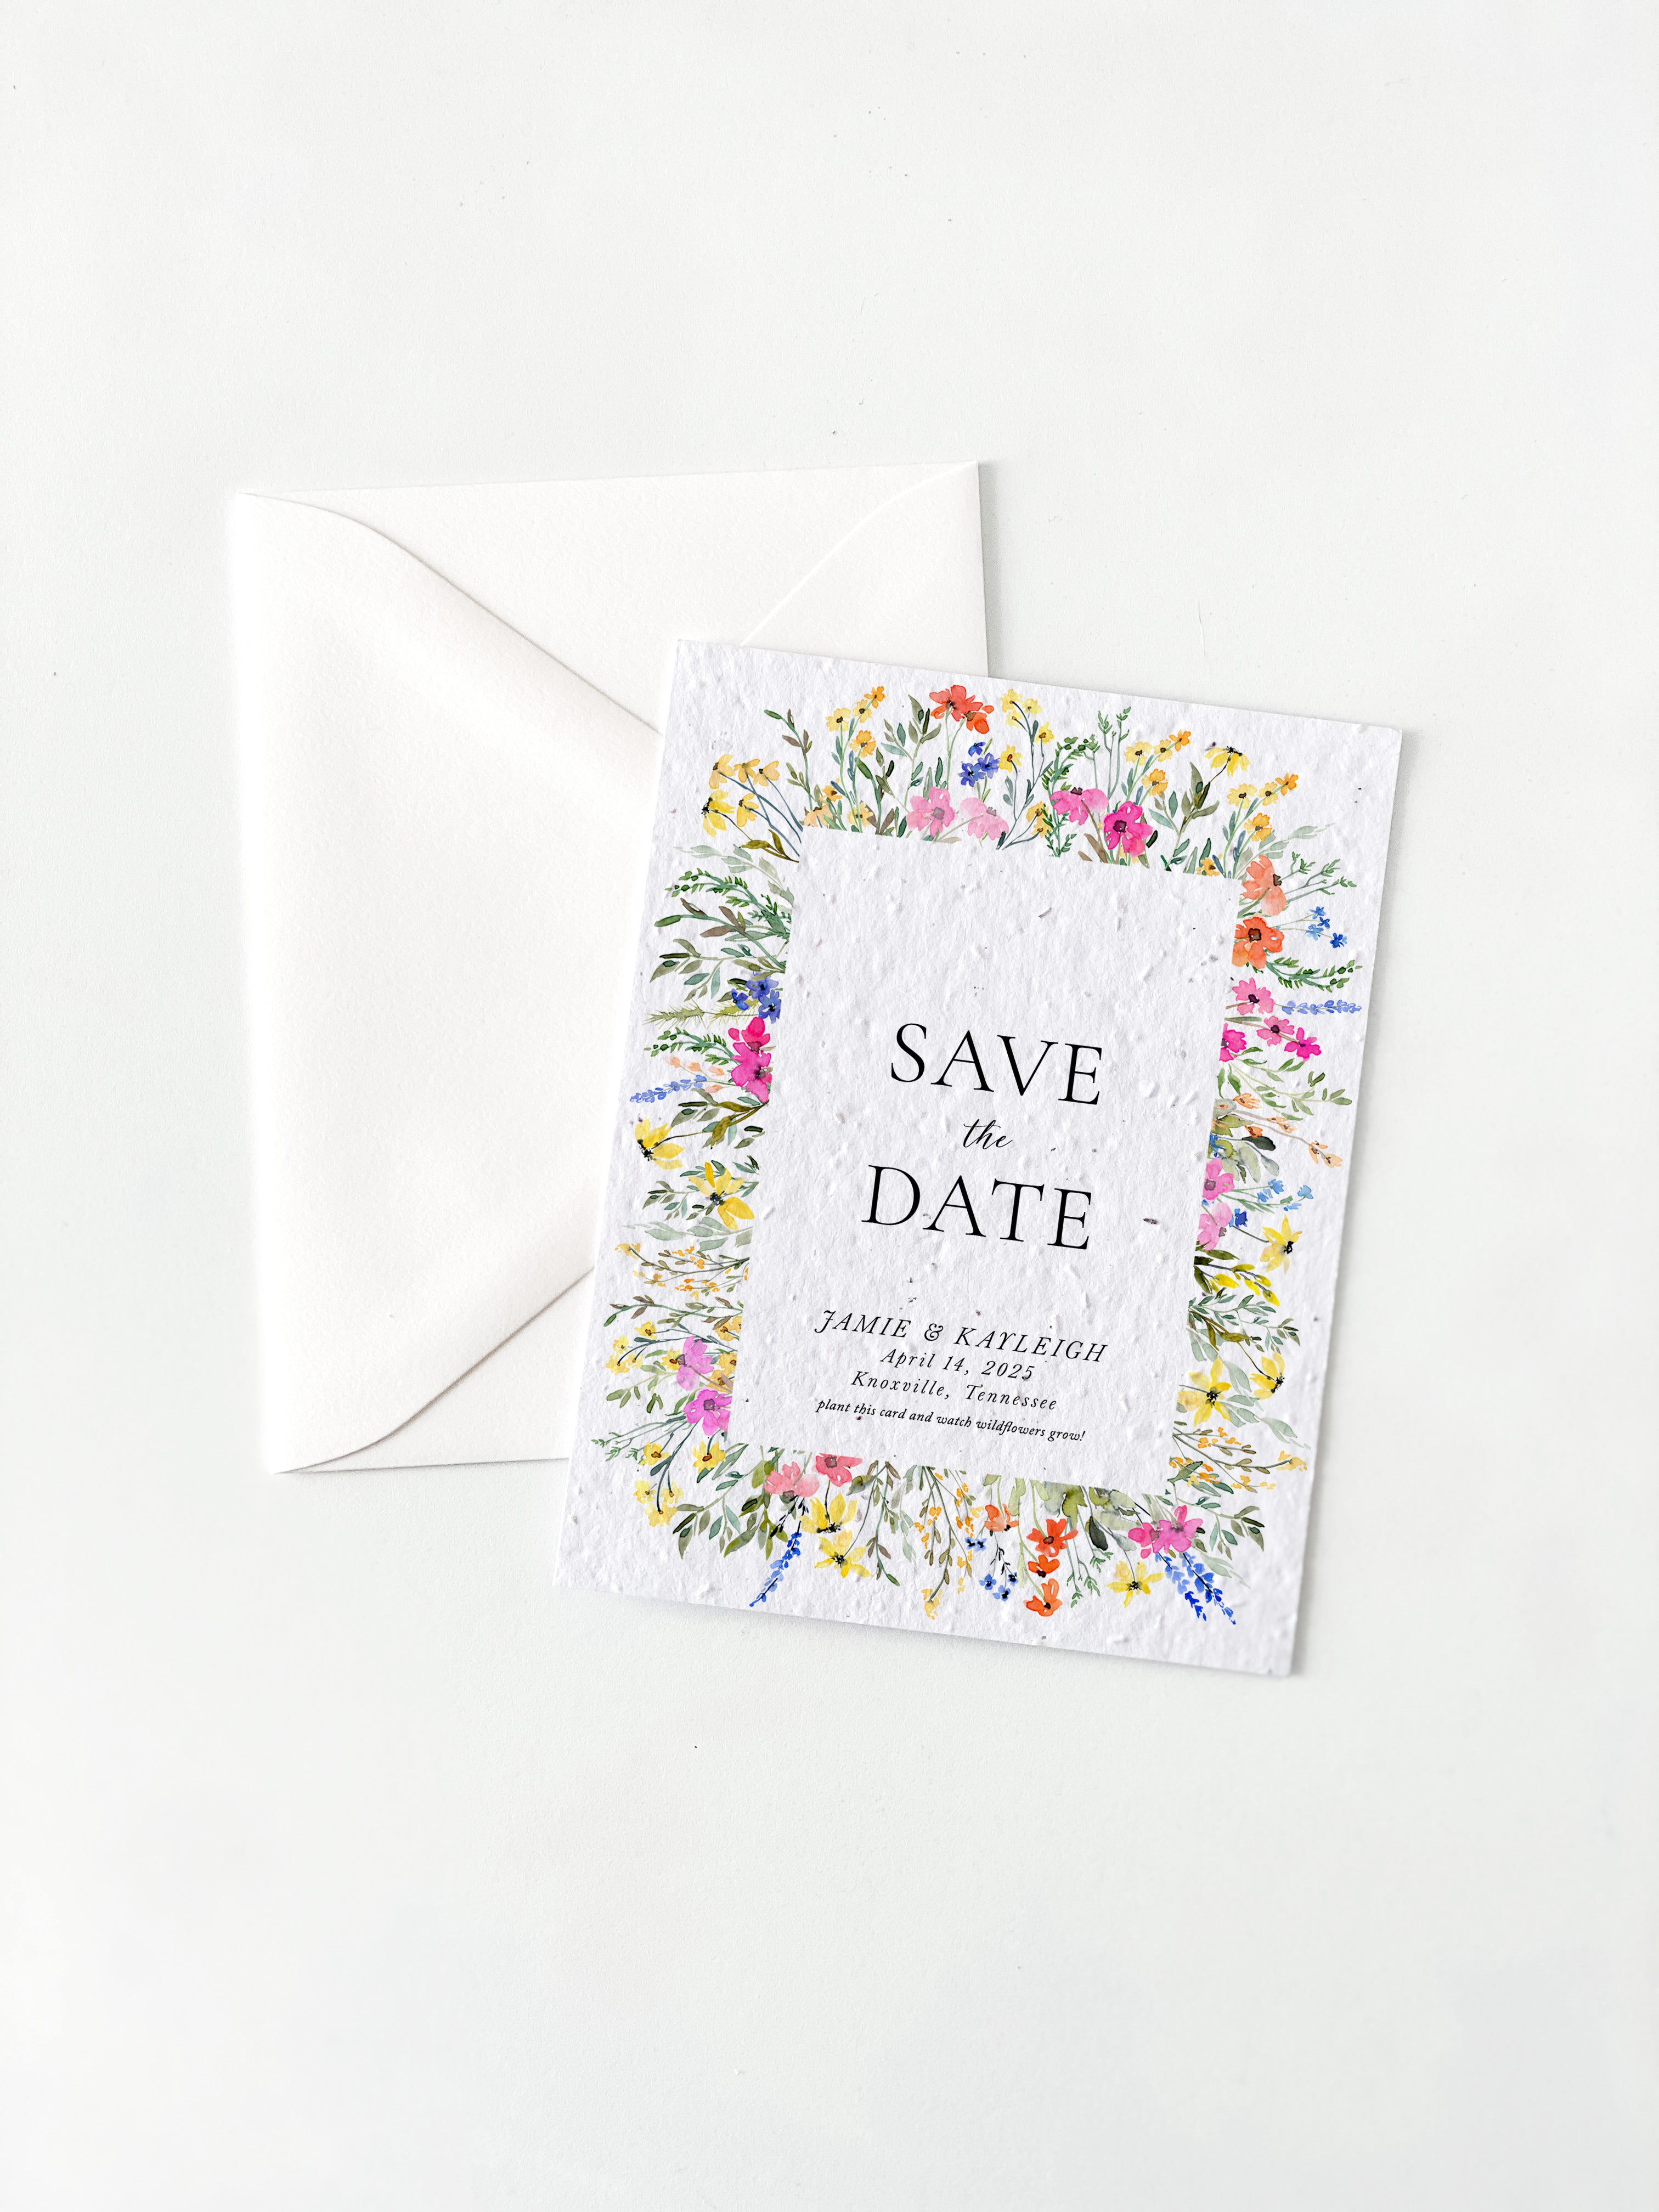 growNOTES™ Plantable Save the Dates - Bright Wildflower Frame (10 Count Set)